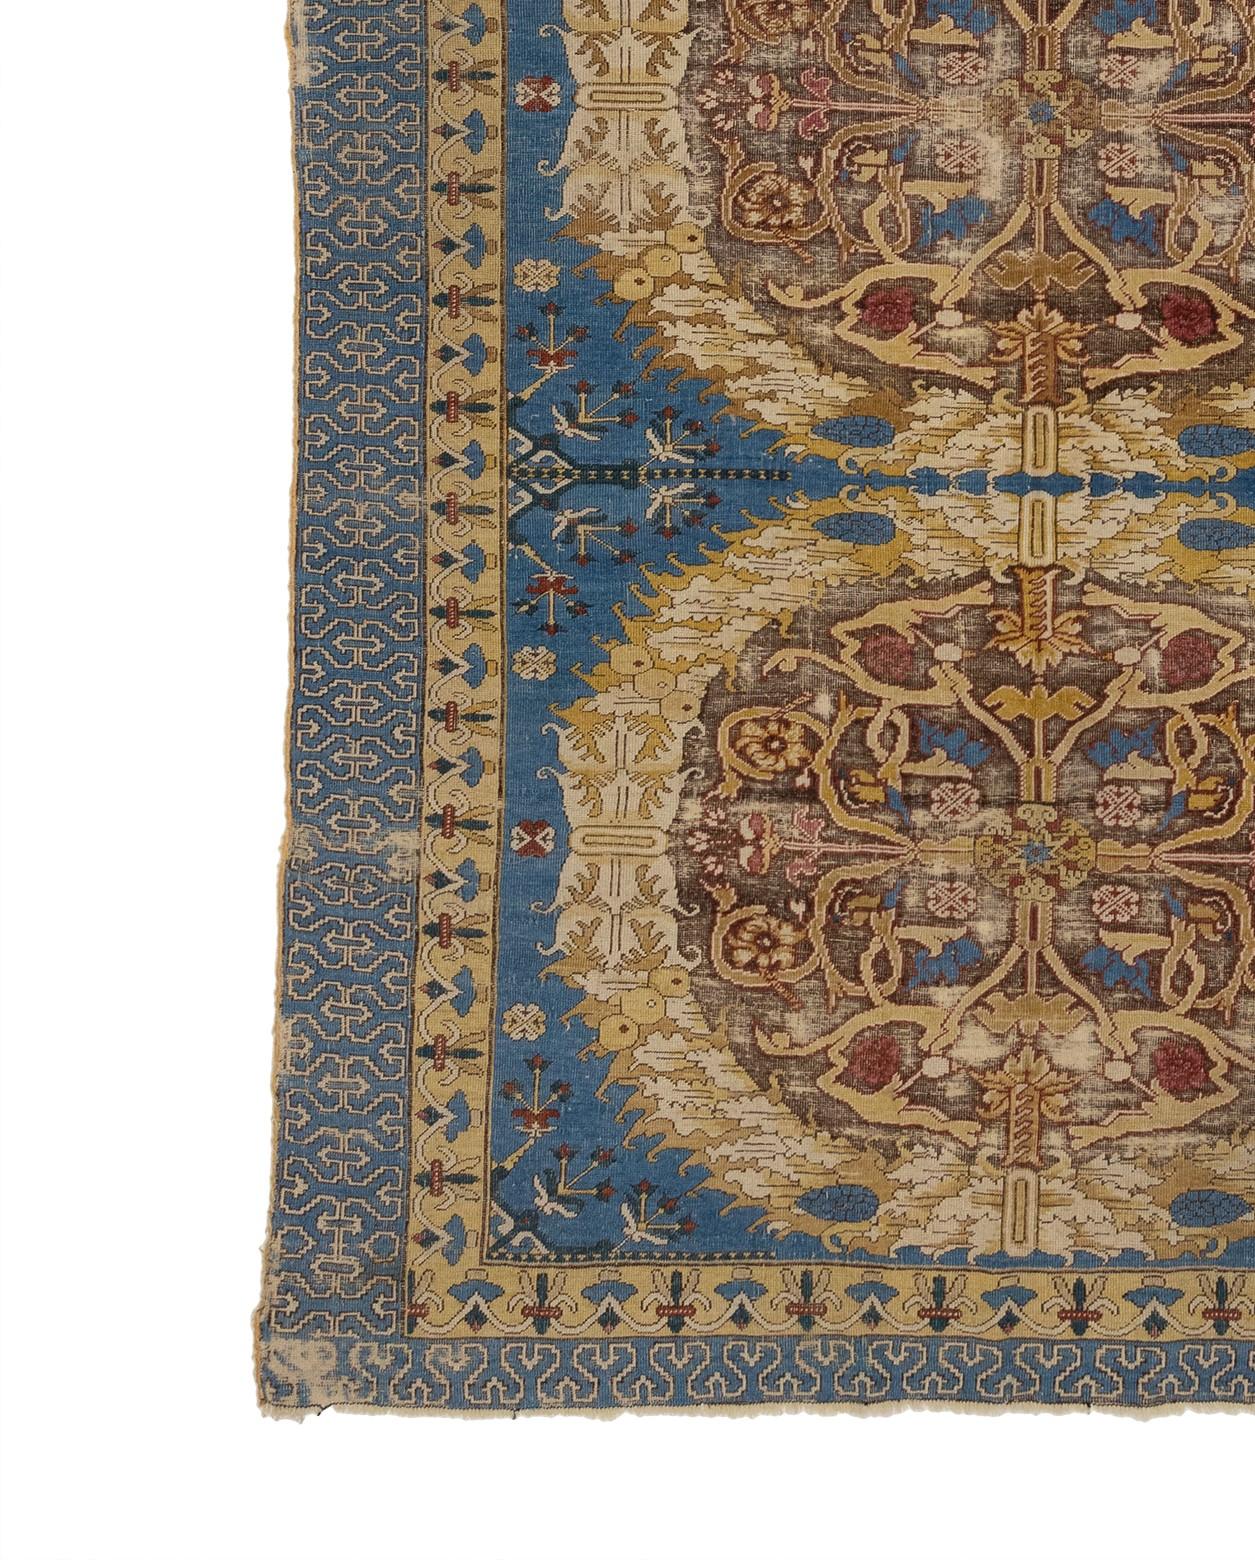 A traditional rug or carpet known as Antique Caucasian Karabagh is believed to have originated in the Karabagh region of the Caucasus Mountains, which spans parts of modern-day Azerbaijan and Armenia. With three big bold medallions, these rugs are